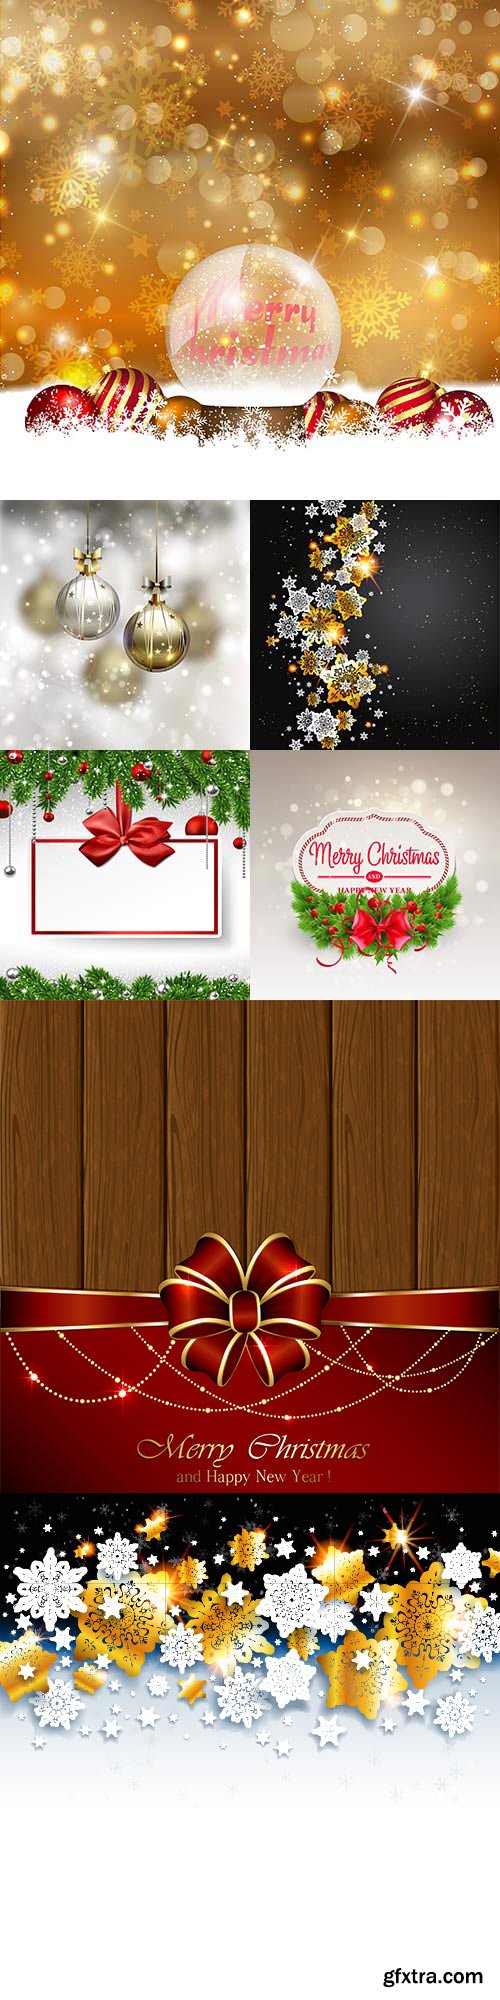 New year\'s backgrounds in vector - 7